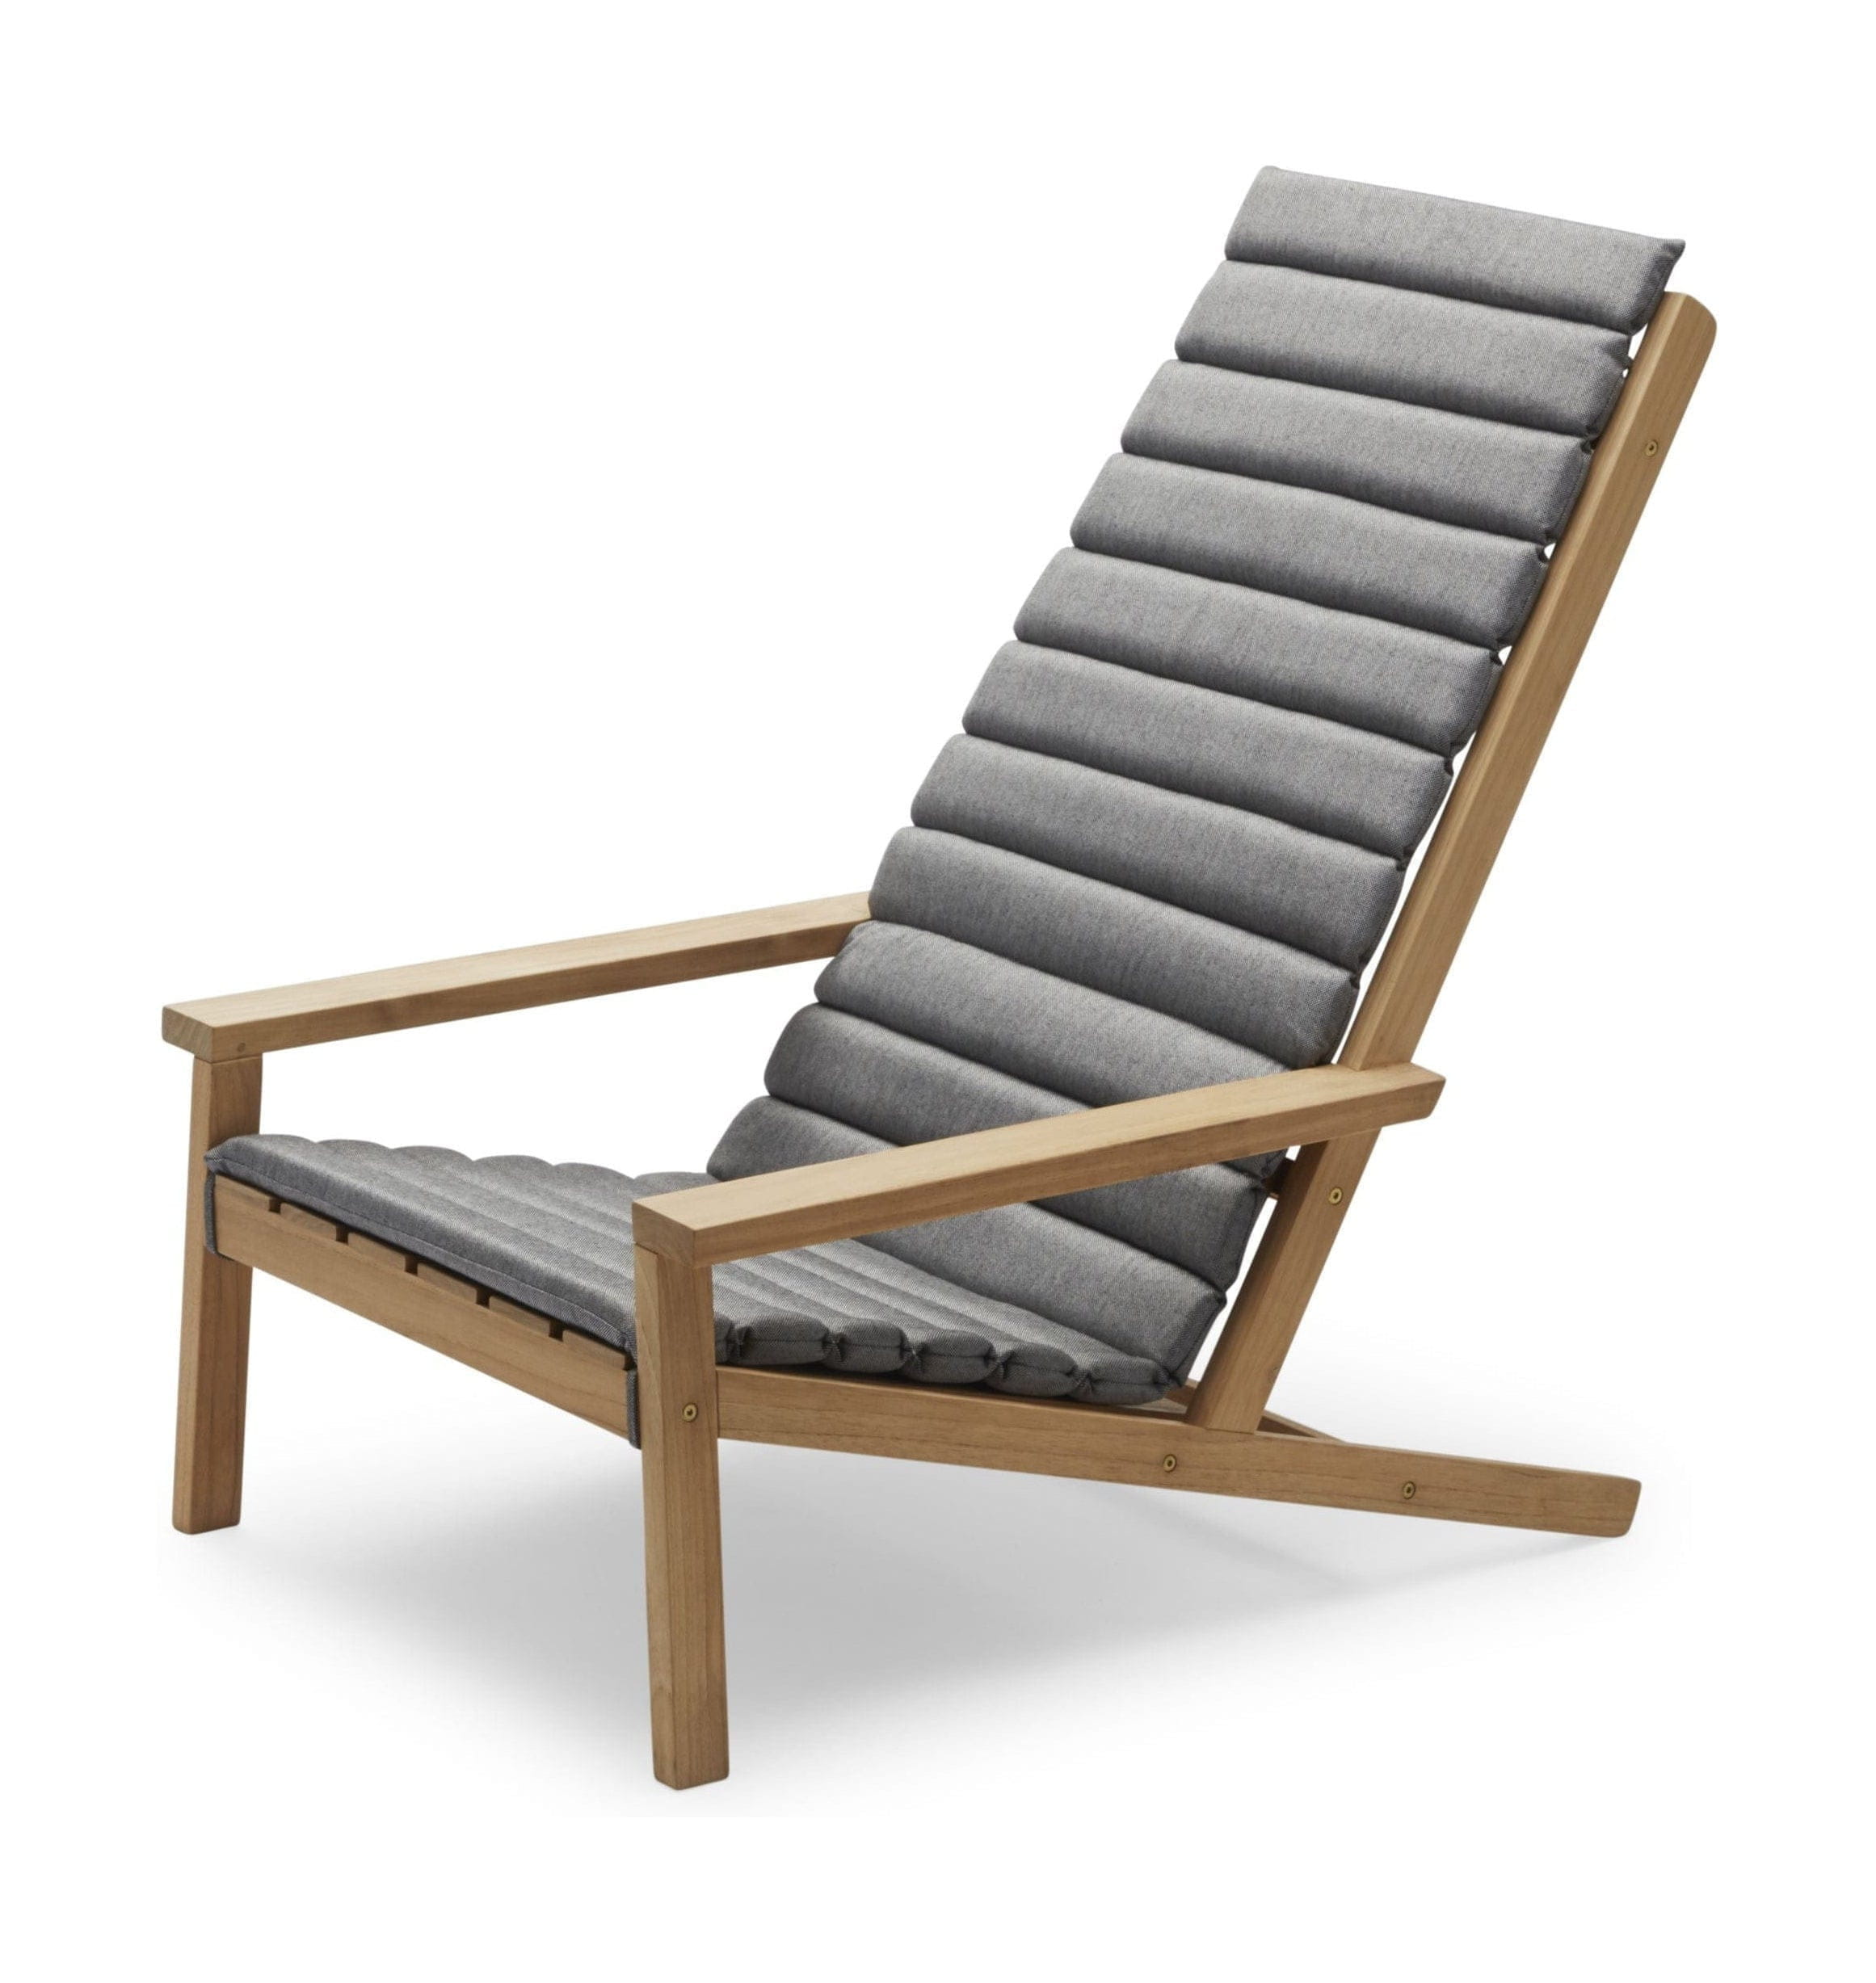 Skagerak Seat Cushion For Between Lines Deckchair, Ashes